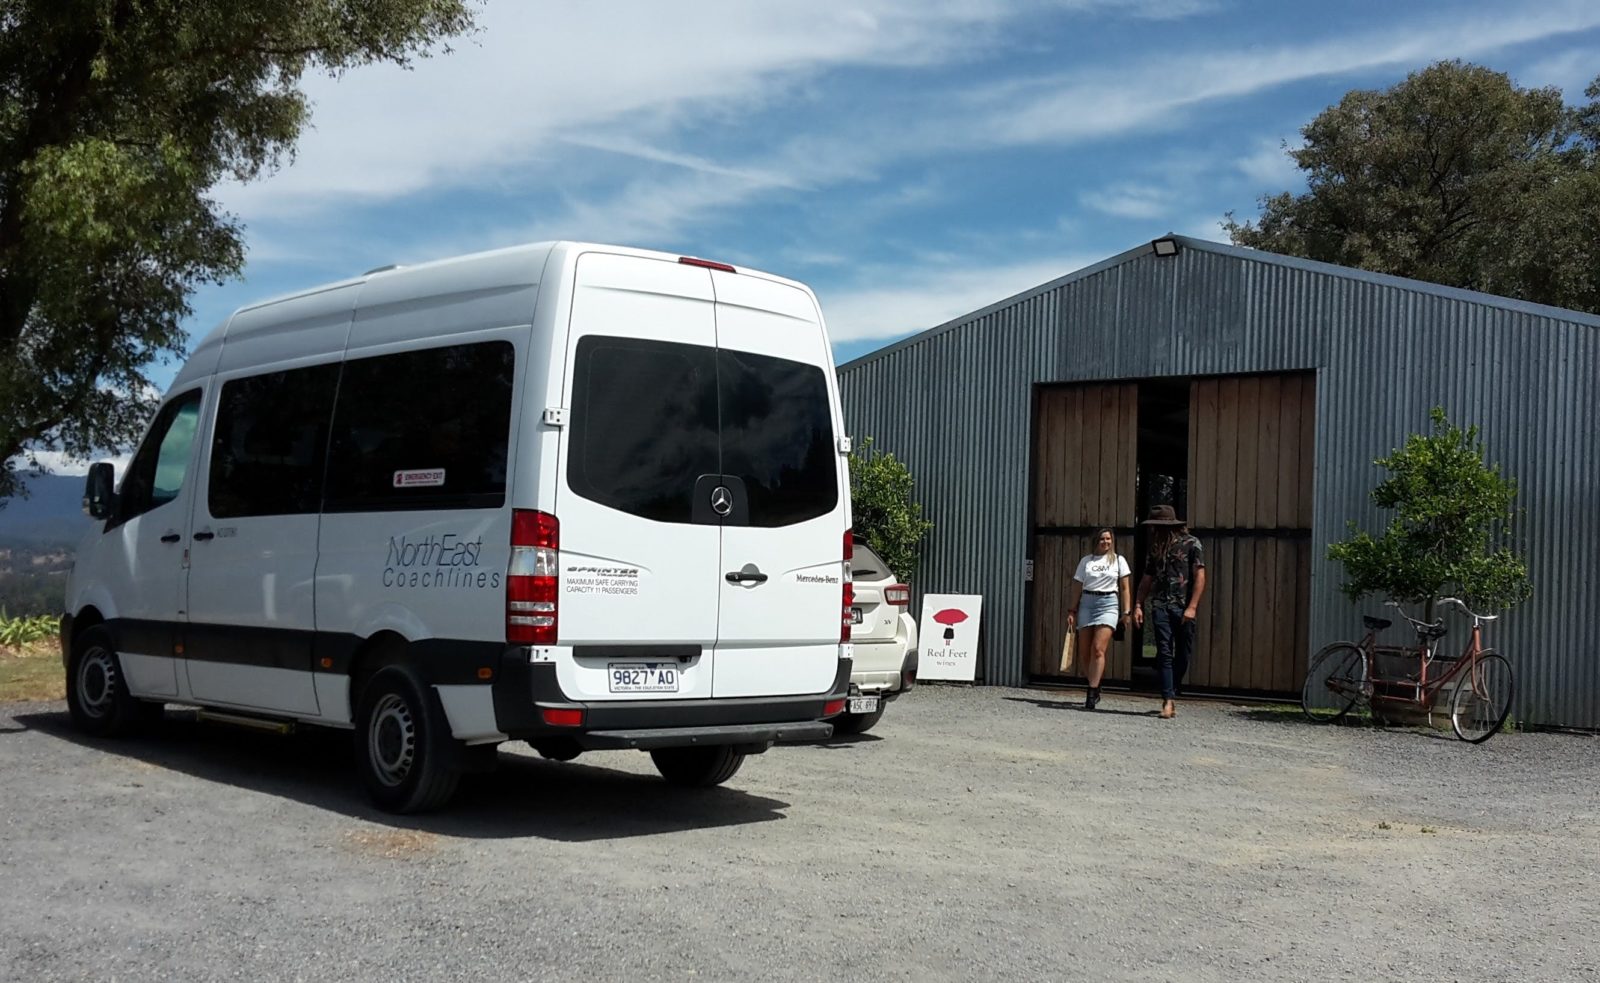 King Valley Winery transfers small group bus tour